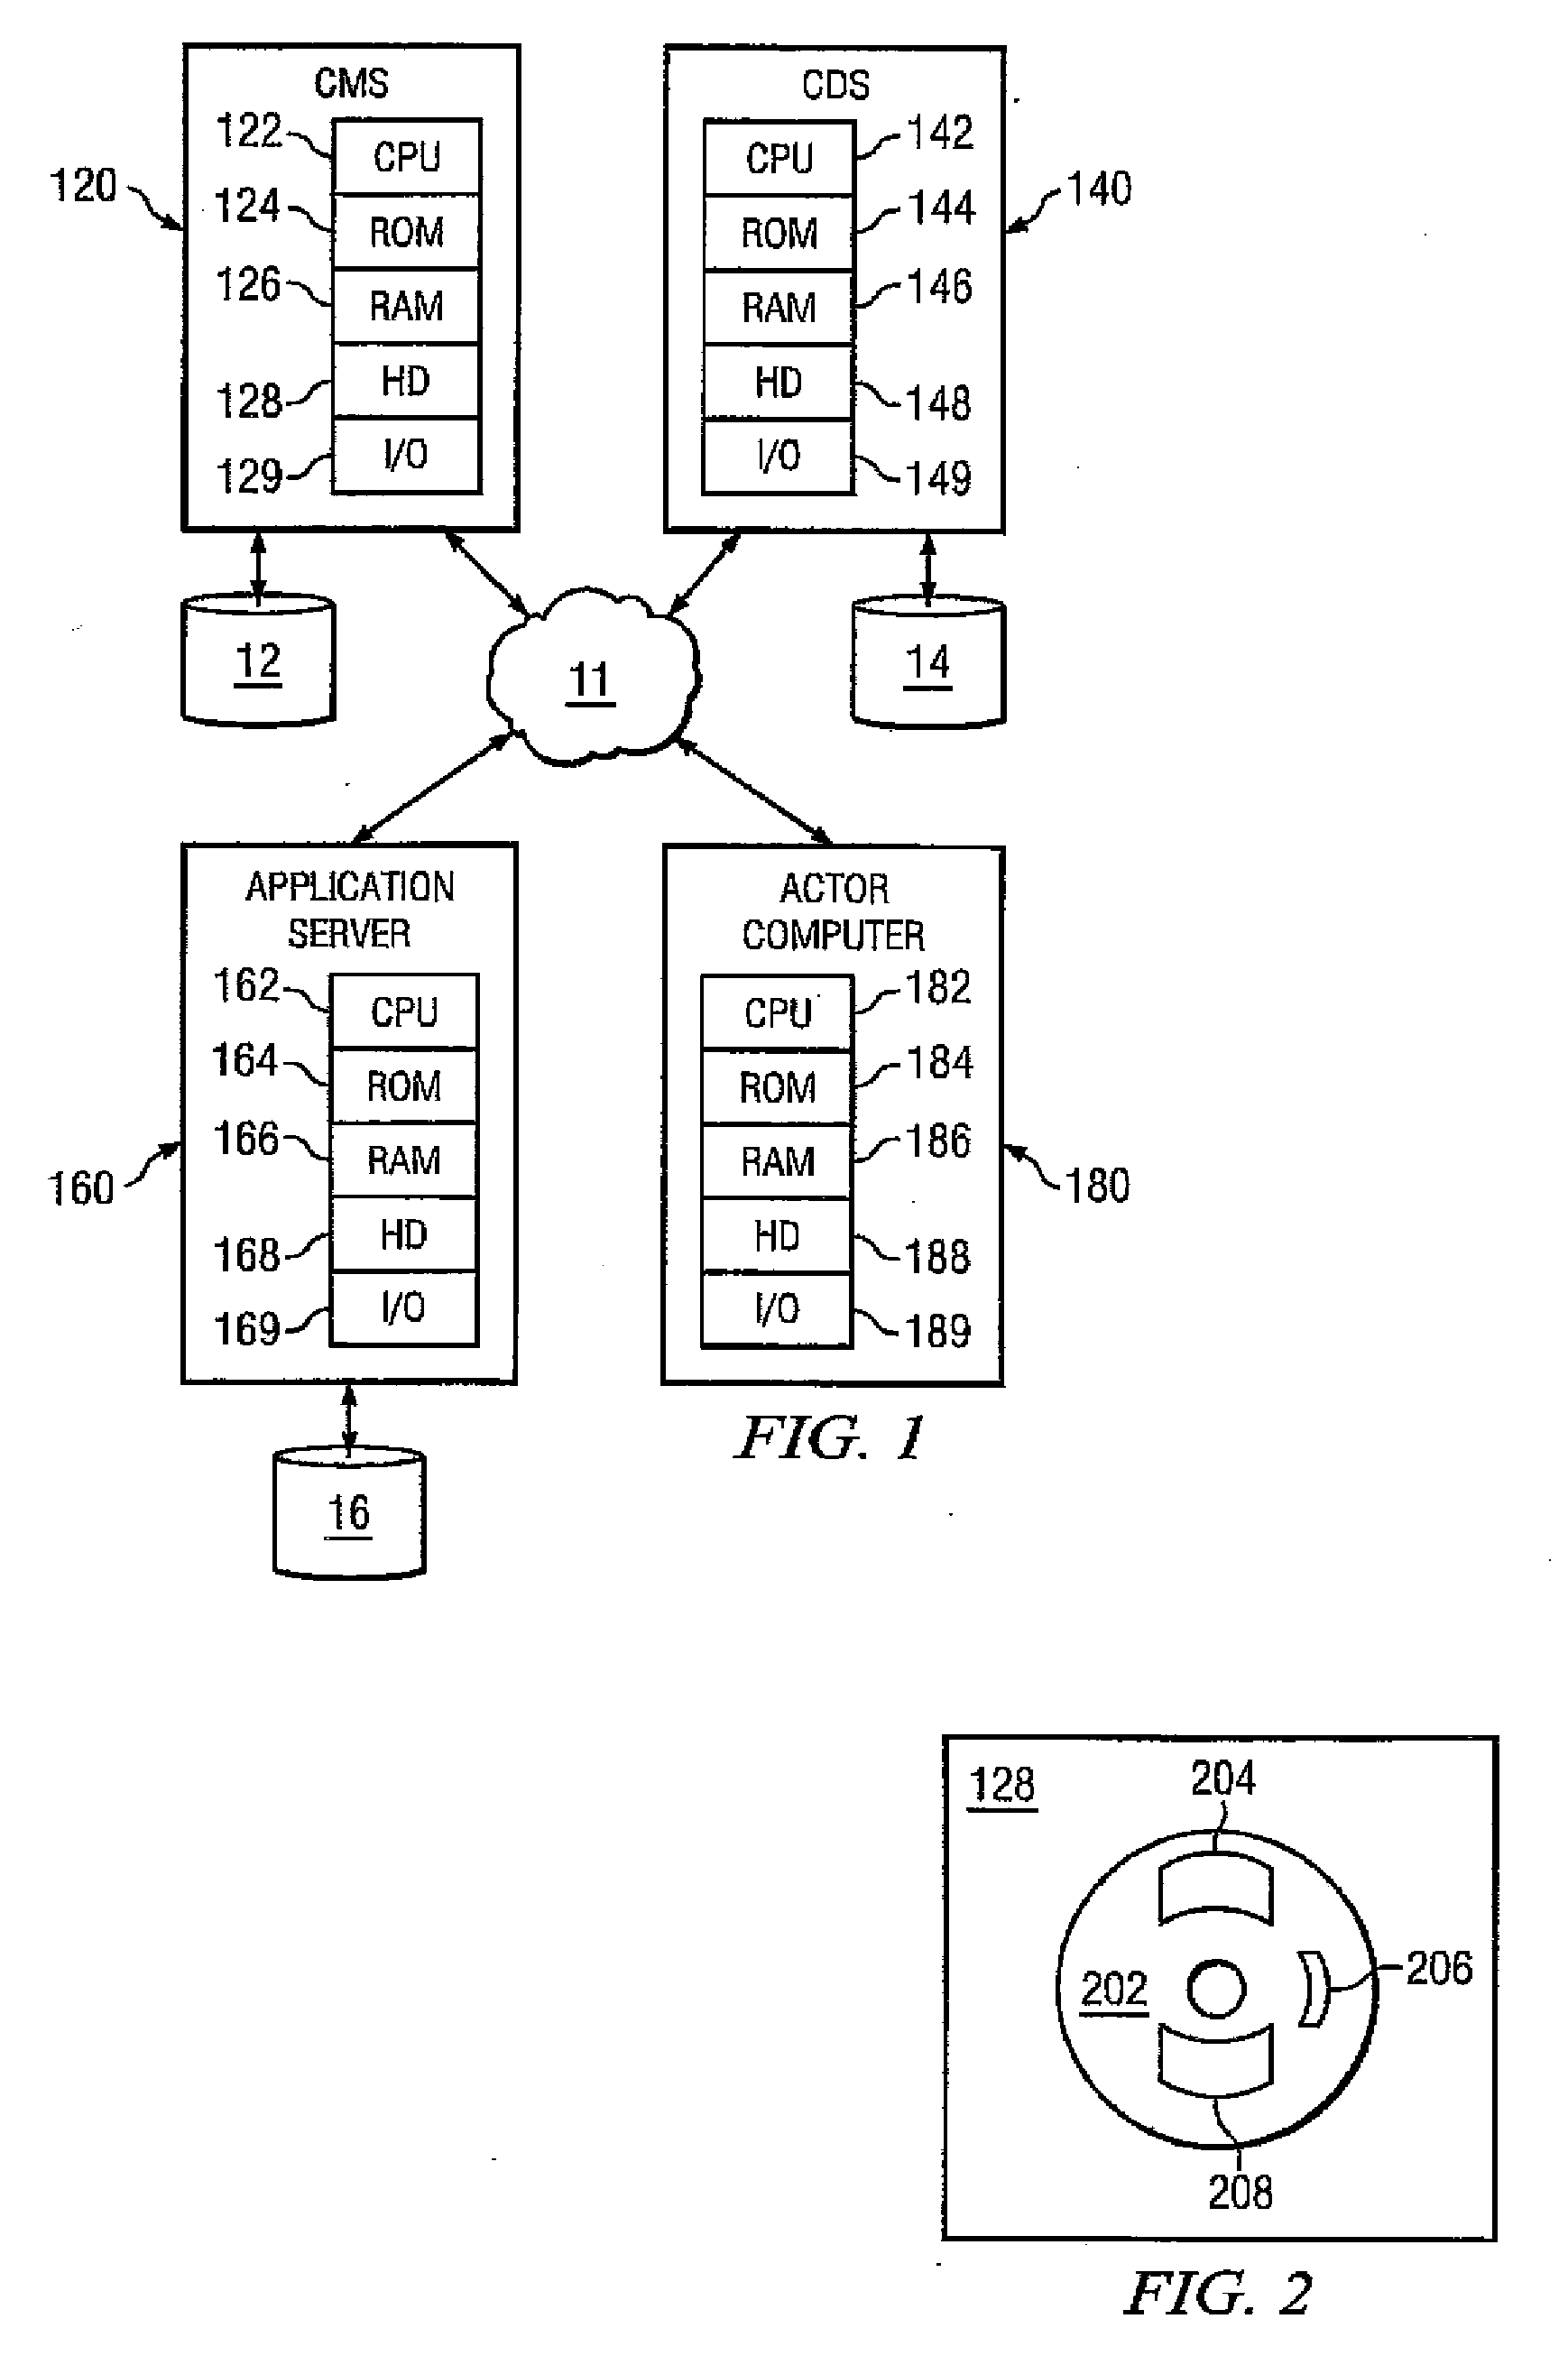 Method and System for Modeling of System Content for Businesses